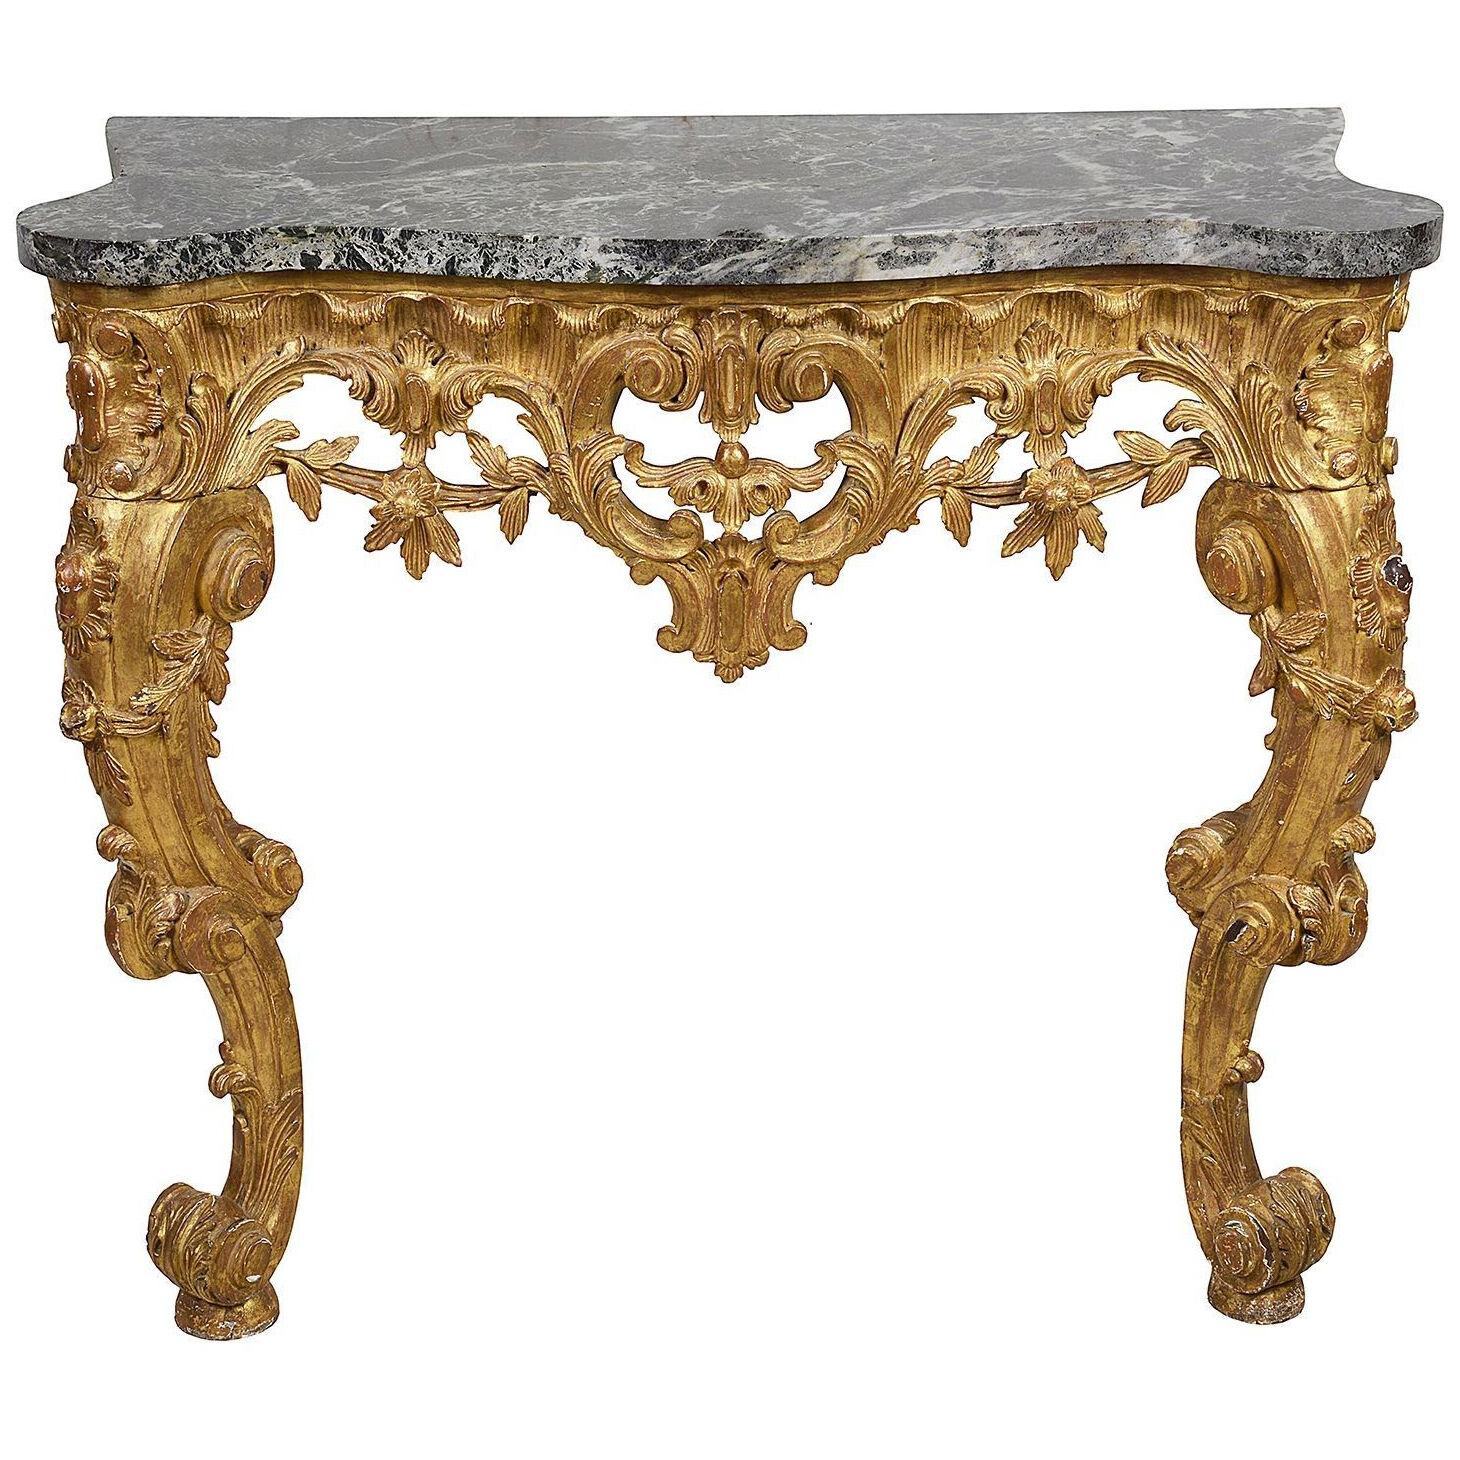 19th Century French carved giltwood console table.